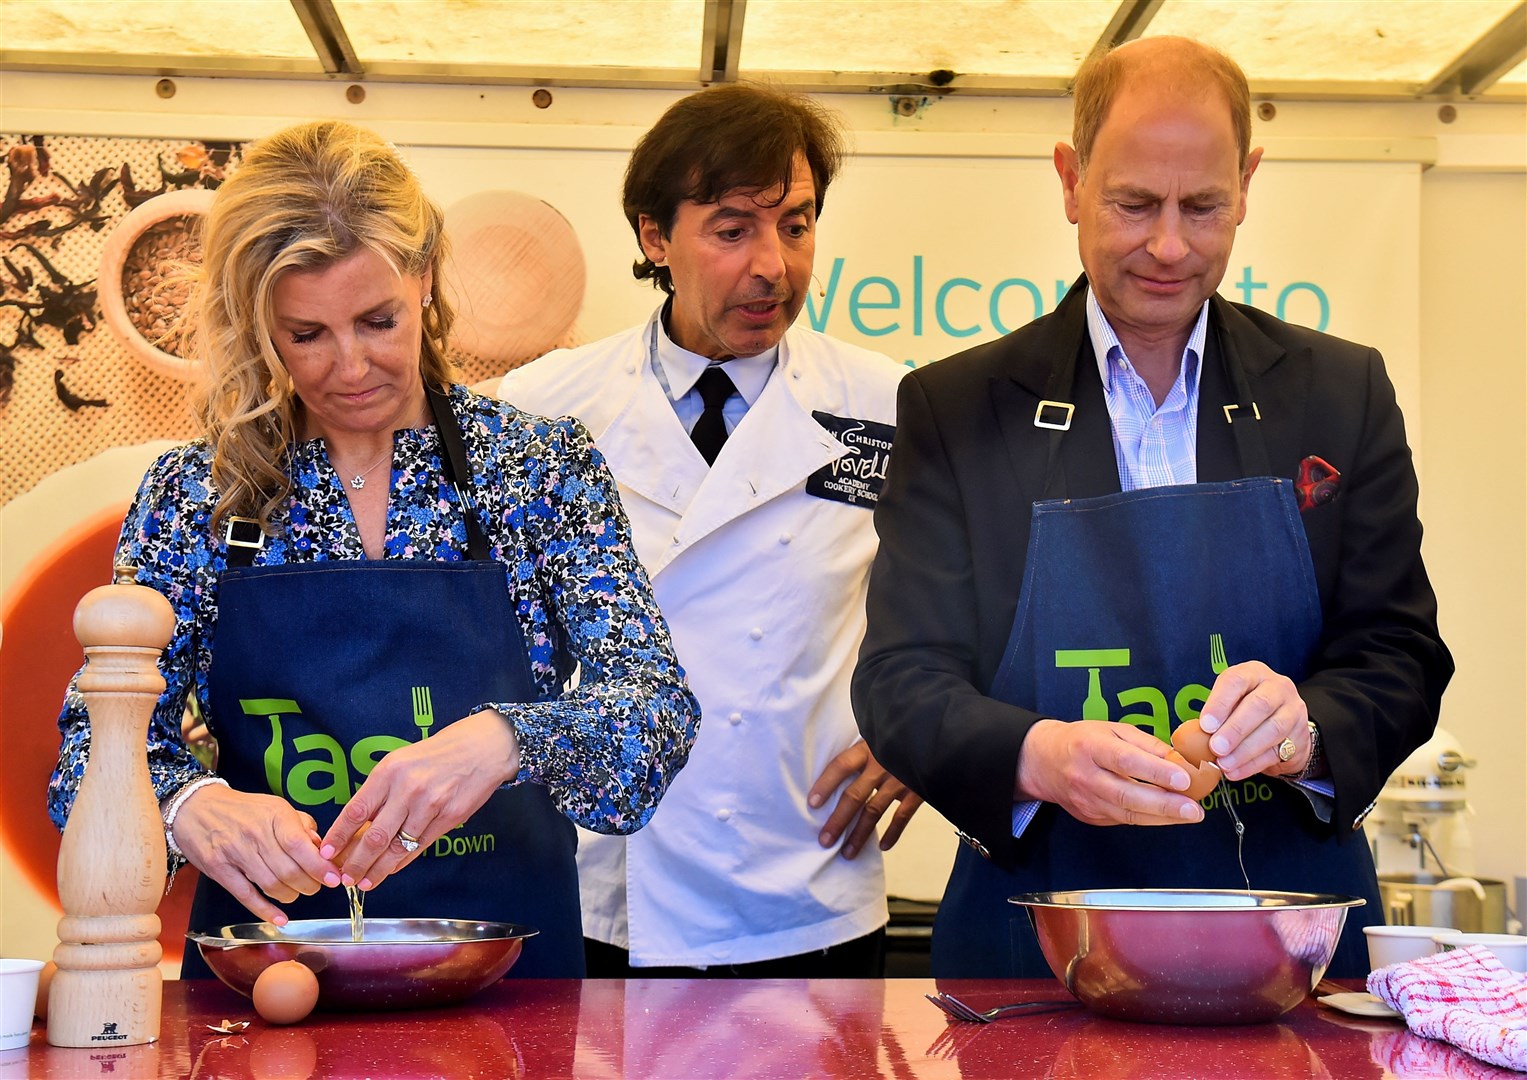 French chef Jean-Christophe Novelli challenged the royal couple to make omelettes during their visit (Clodagh Kilcoyne/PA)